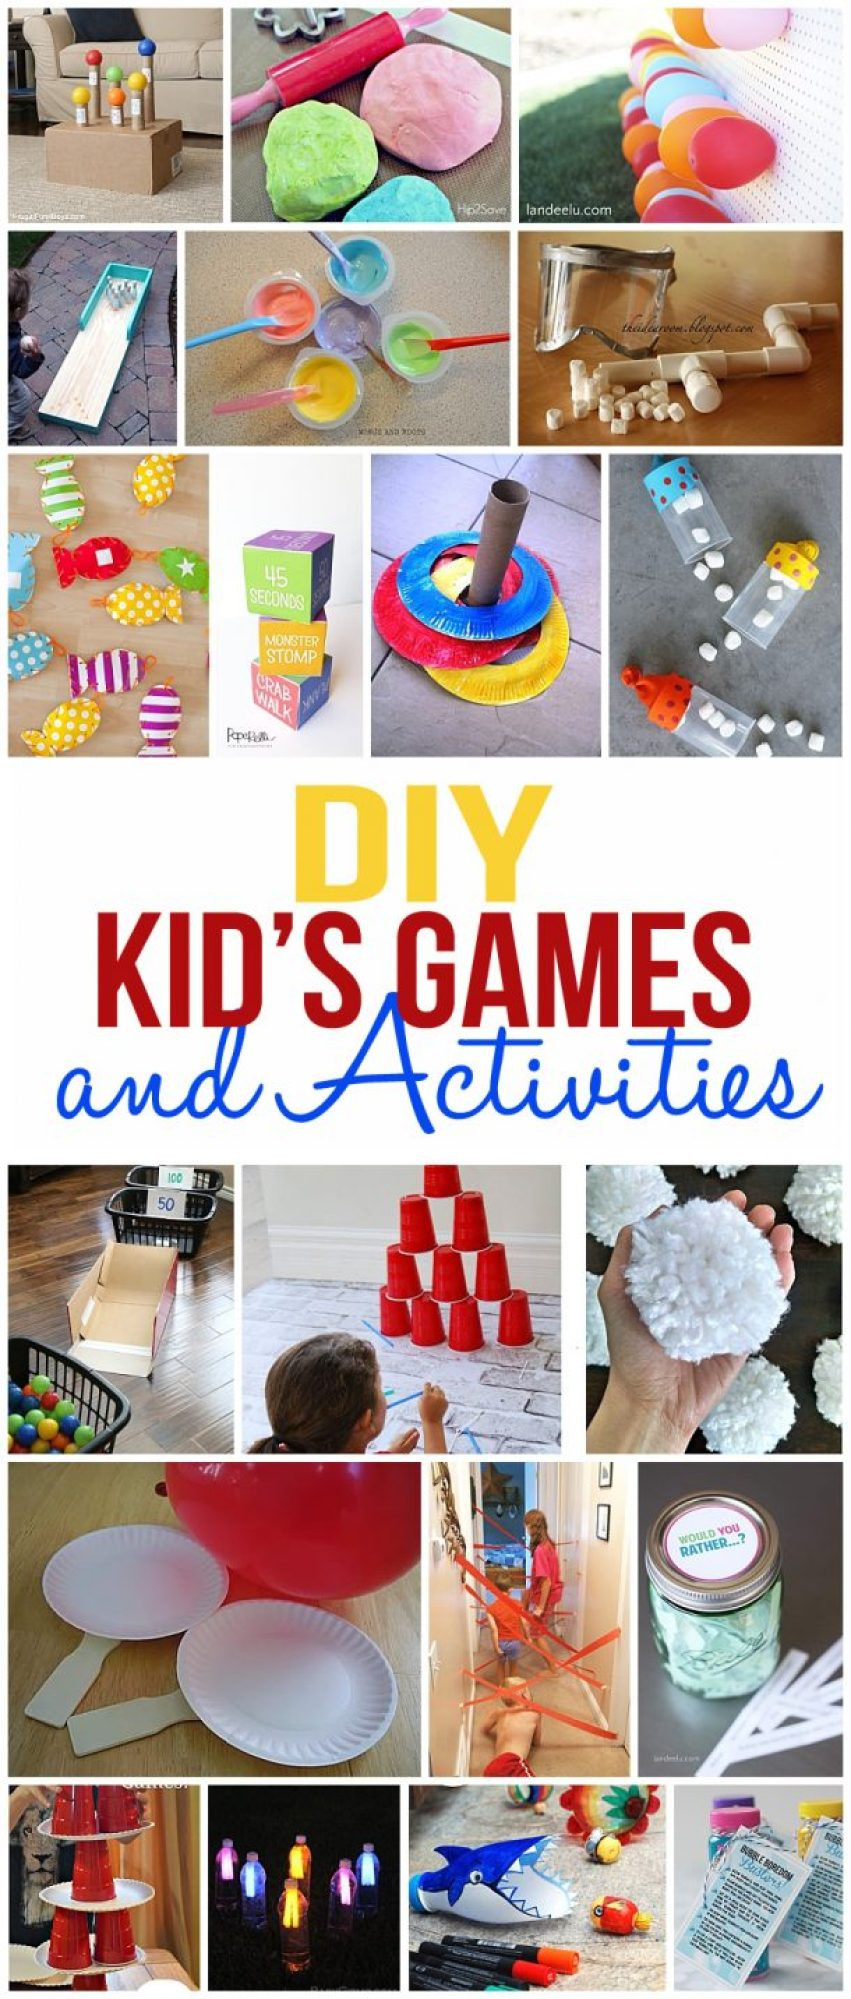 DIY Projects For Toddlers
 DIY Kids Games and Activities for Indoors or Outdoors